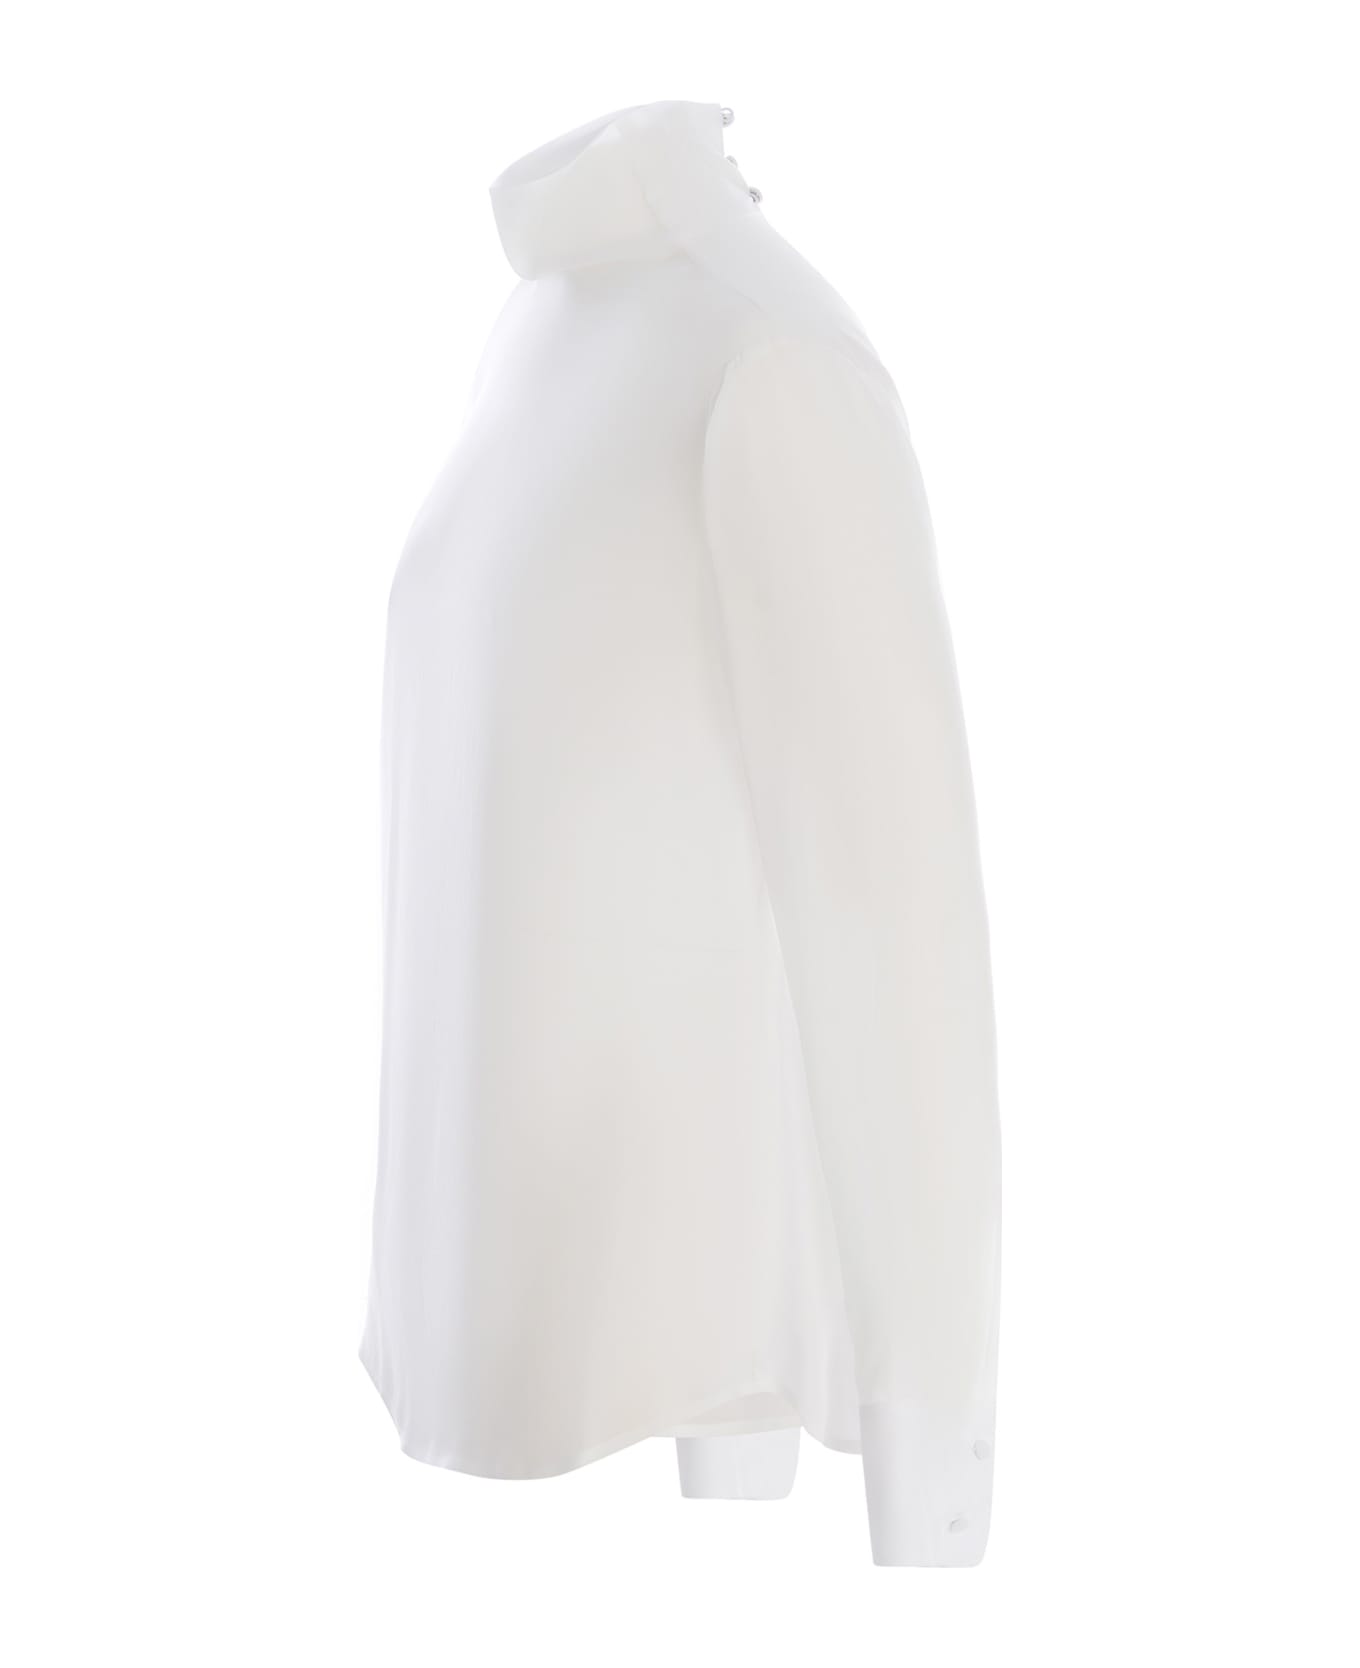 Pinko Blouse Made Of Viscose Georgette - Bianco ブラウス